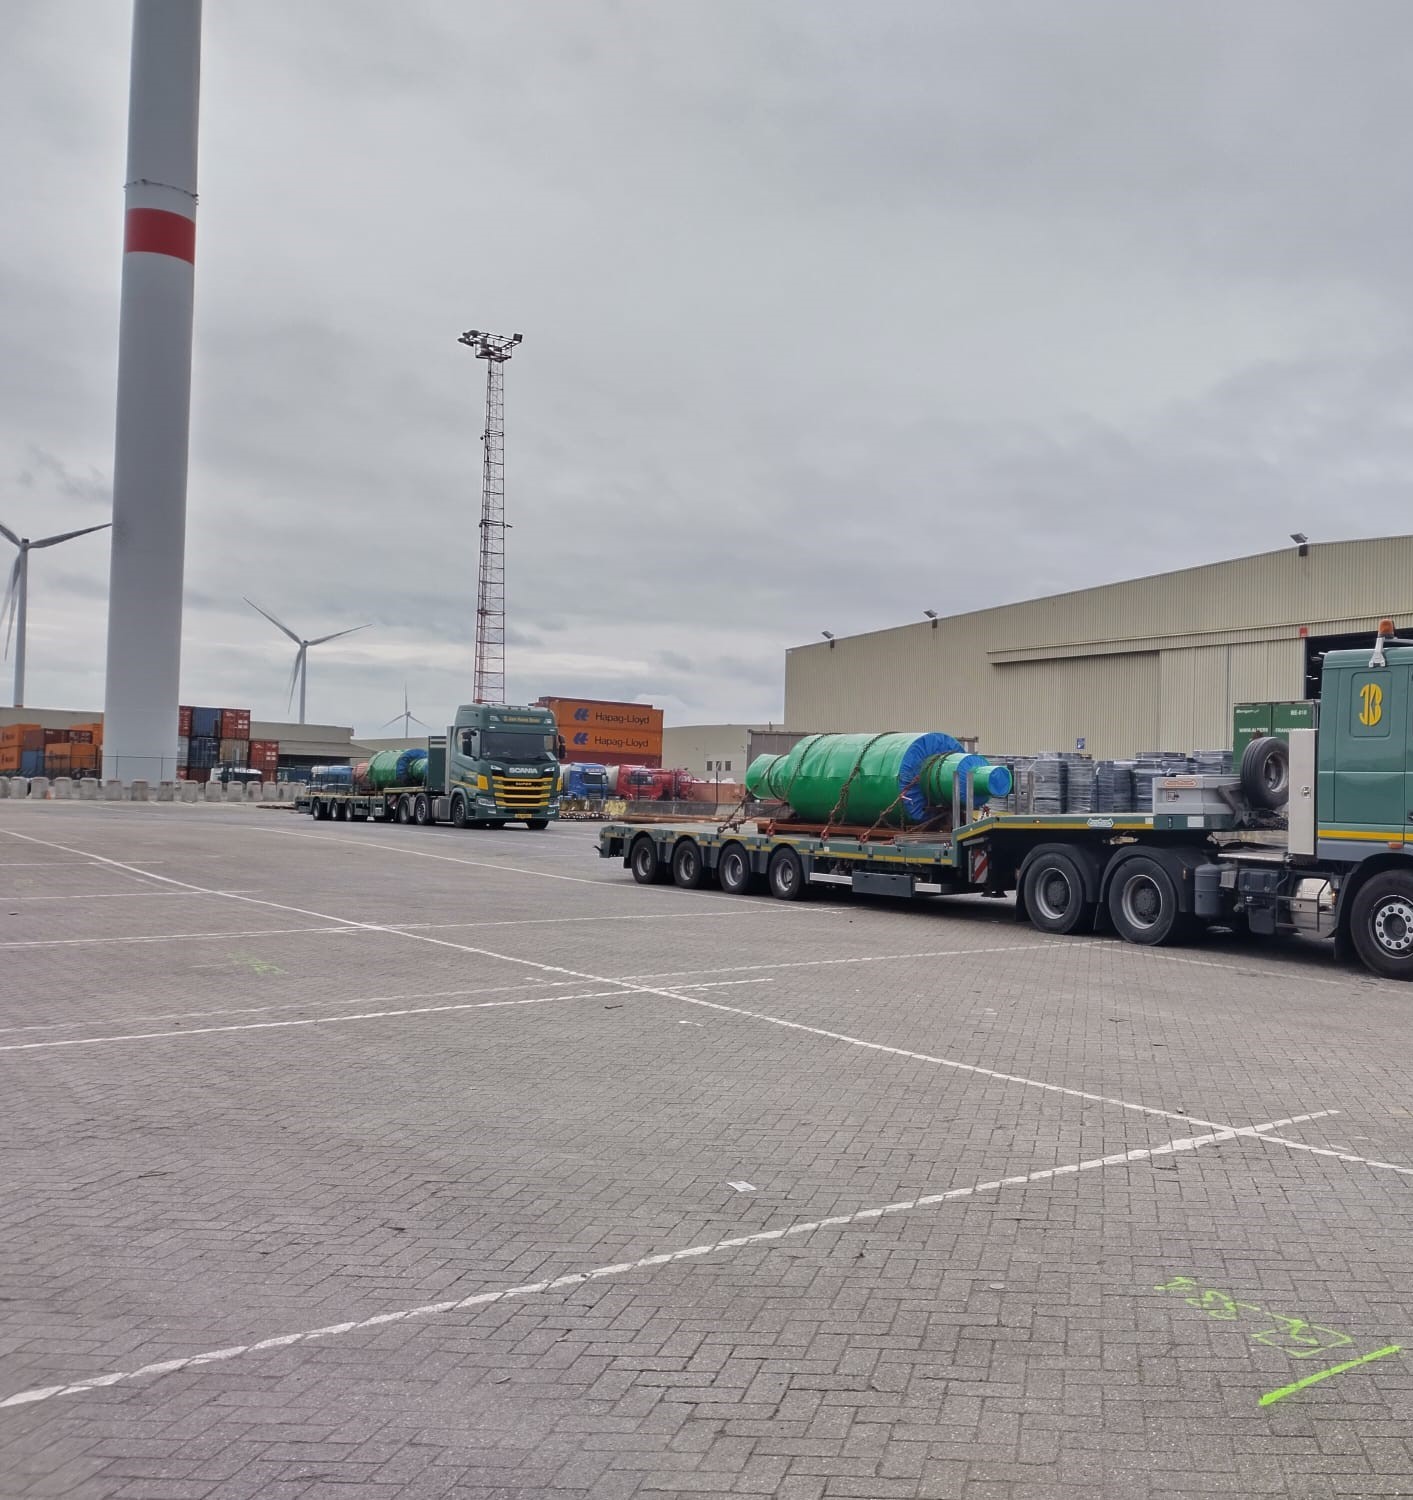 Case Study Brunel Shipping Goods Arrived into Antwerp port on breakbulk vessel from Tianjin, China